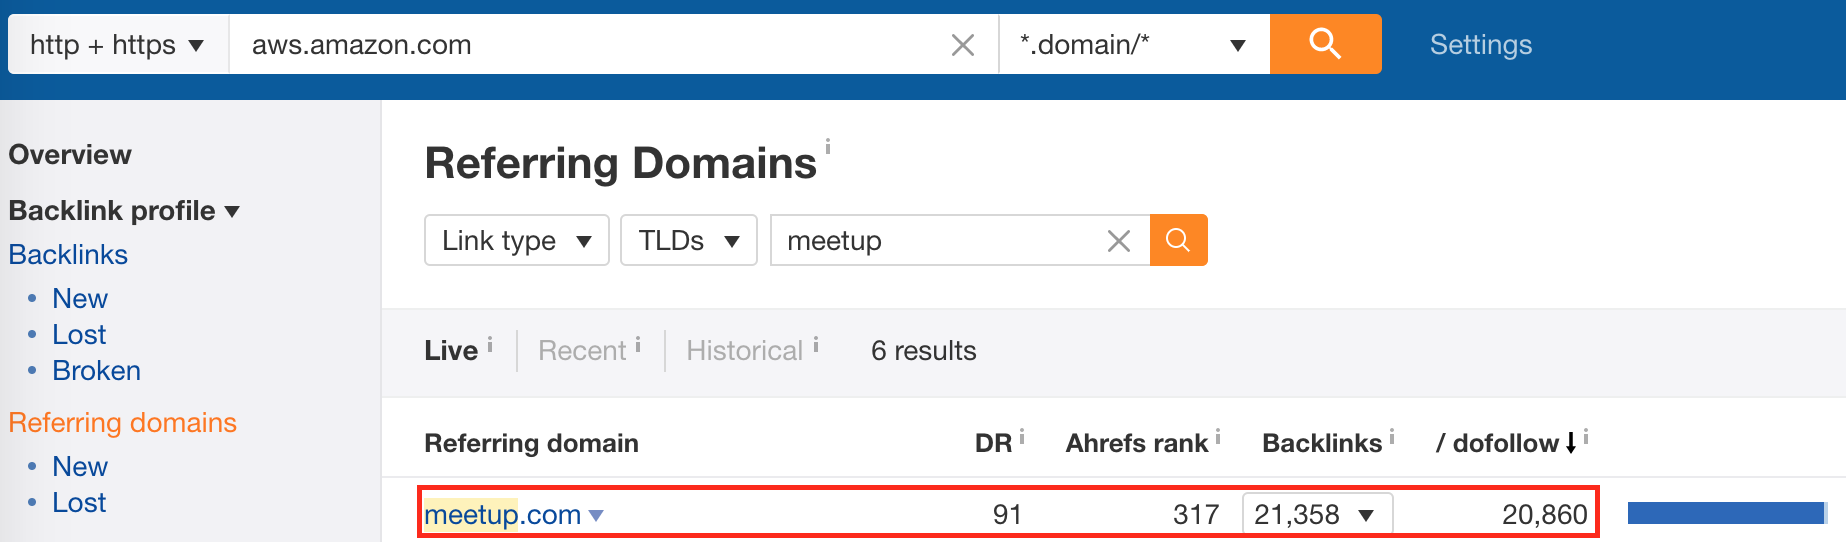 Screenshot showing referring domains to a site